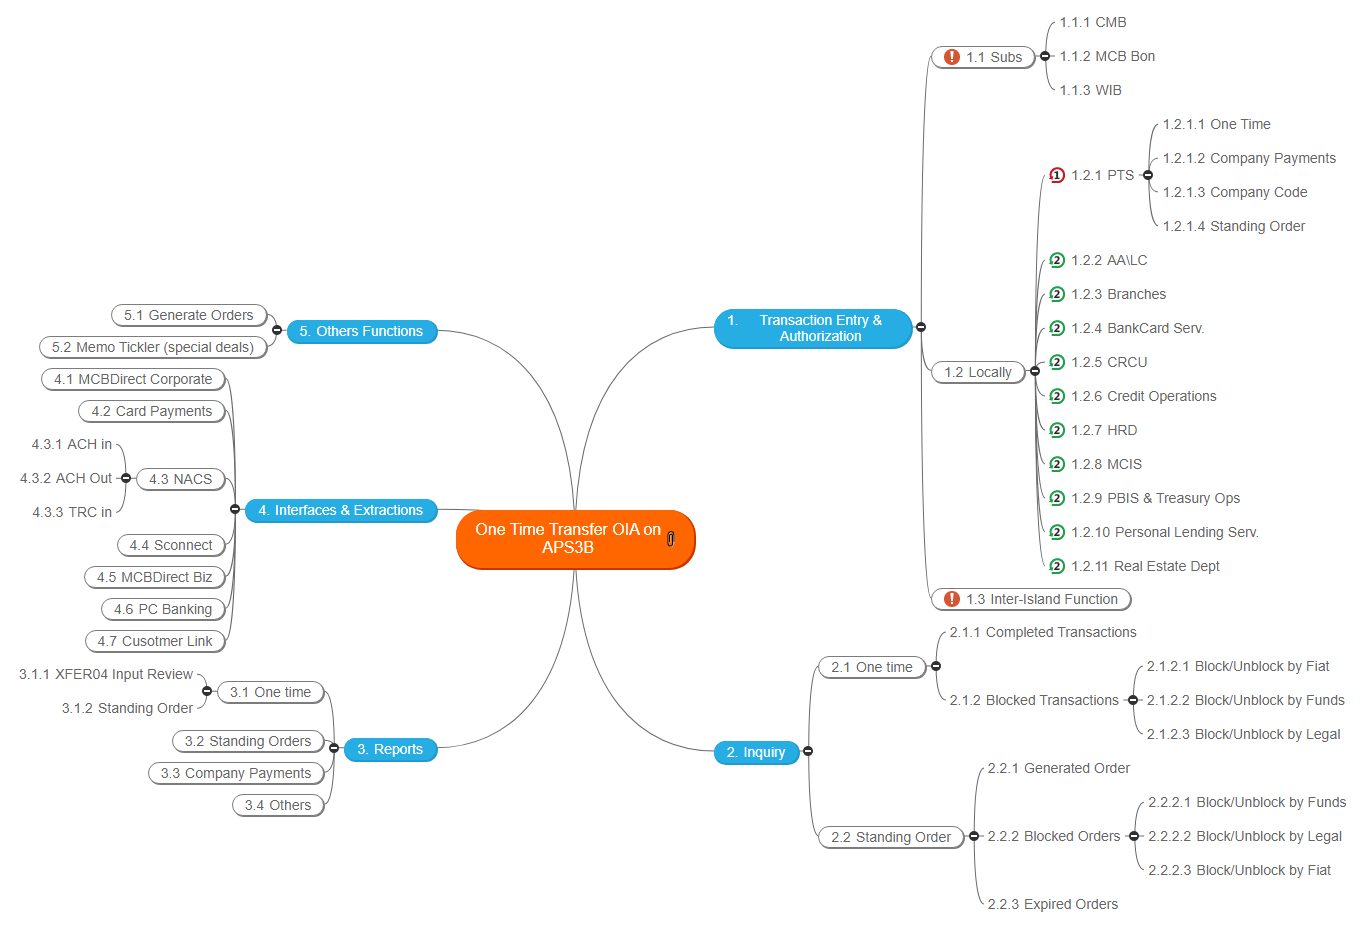 One Time Transfer OIA on APS3B v Mind Map